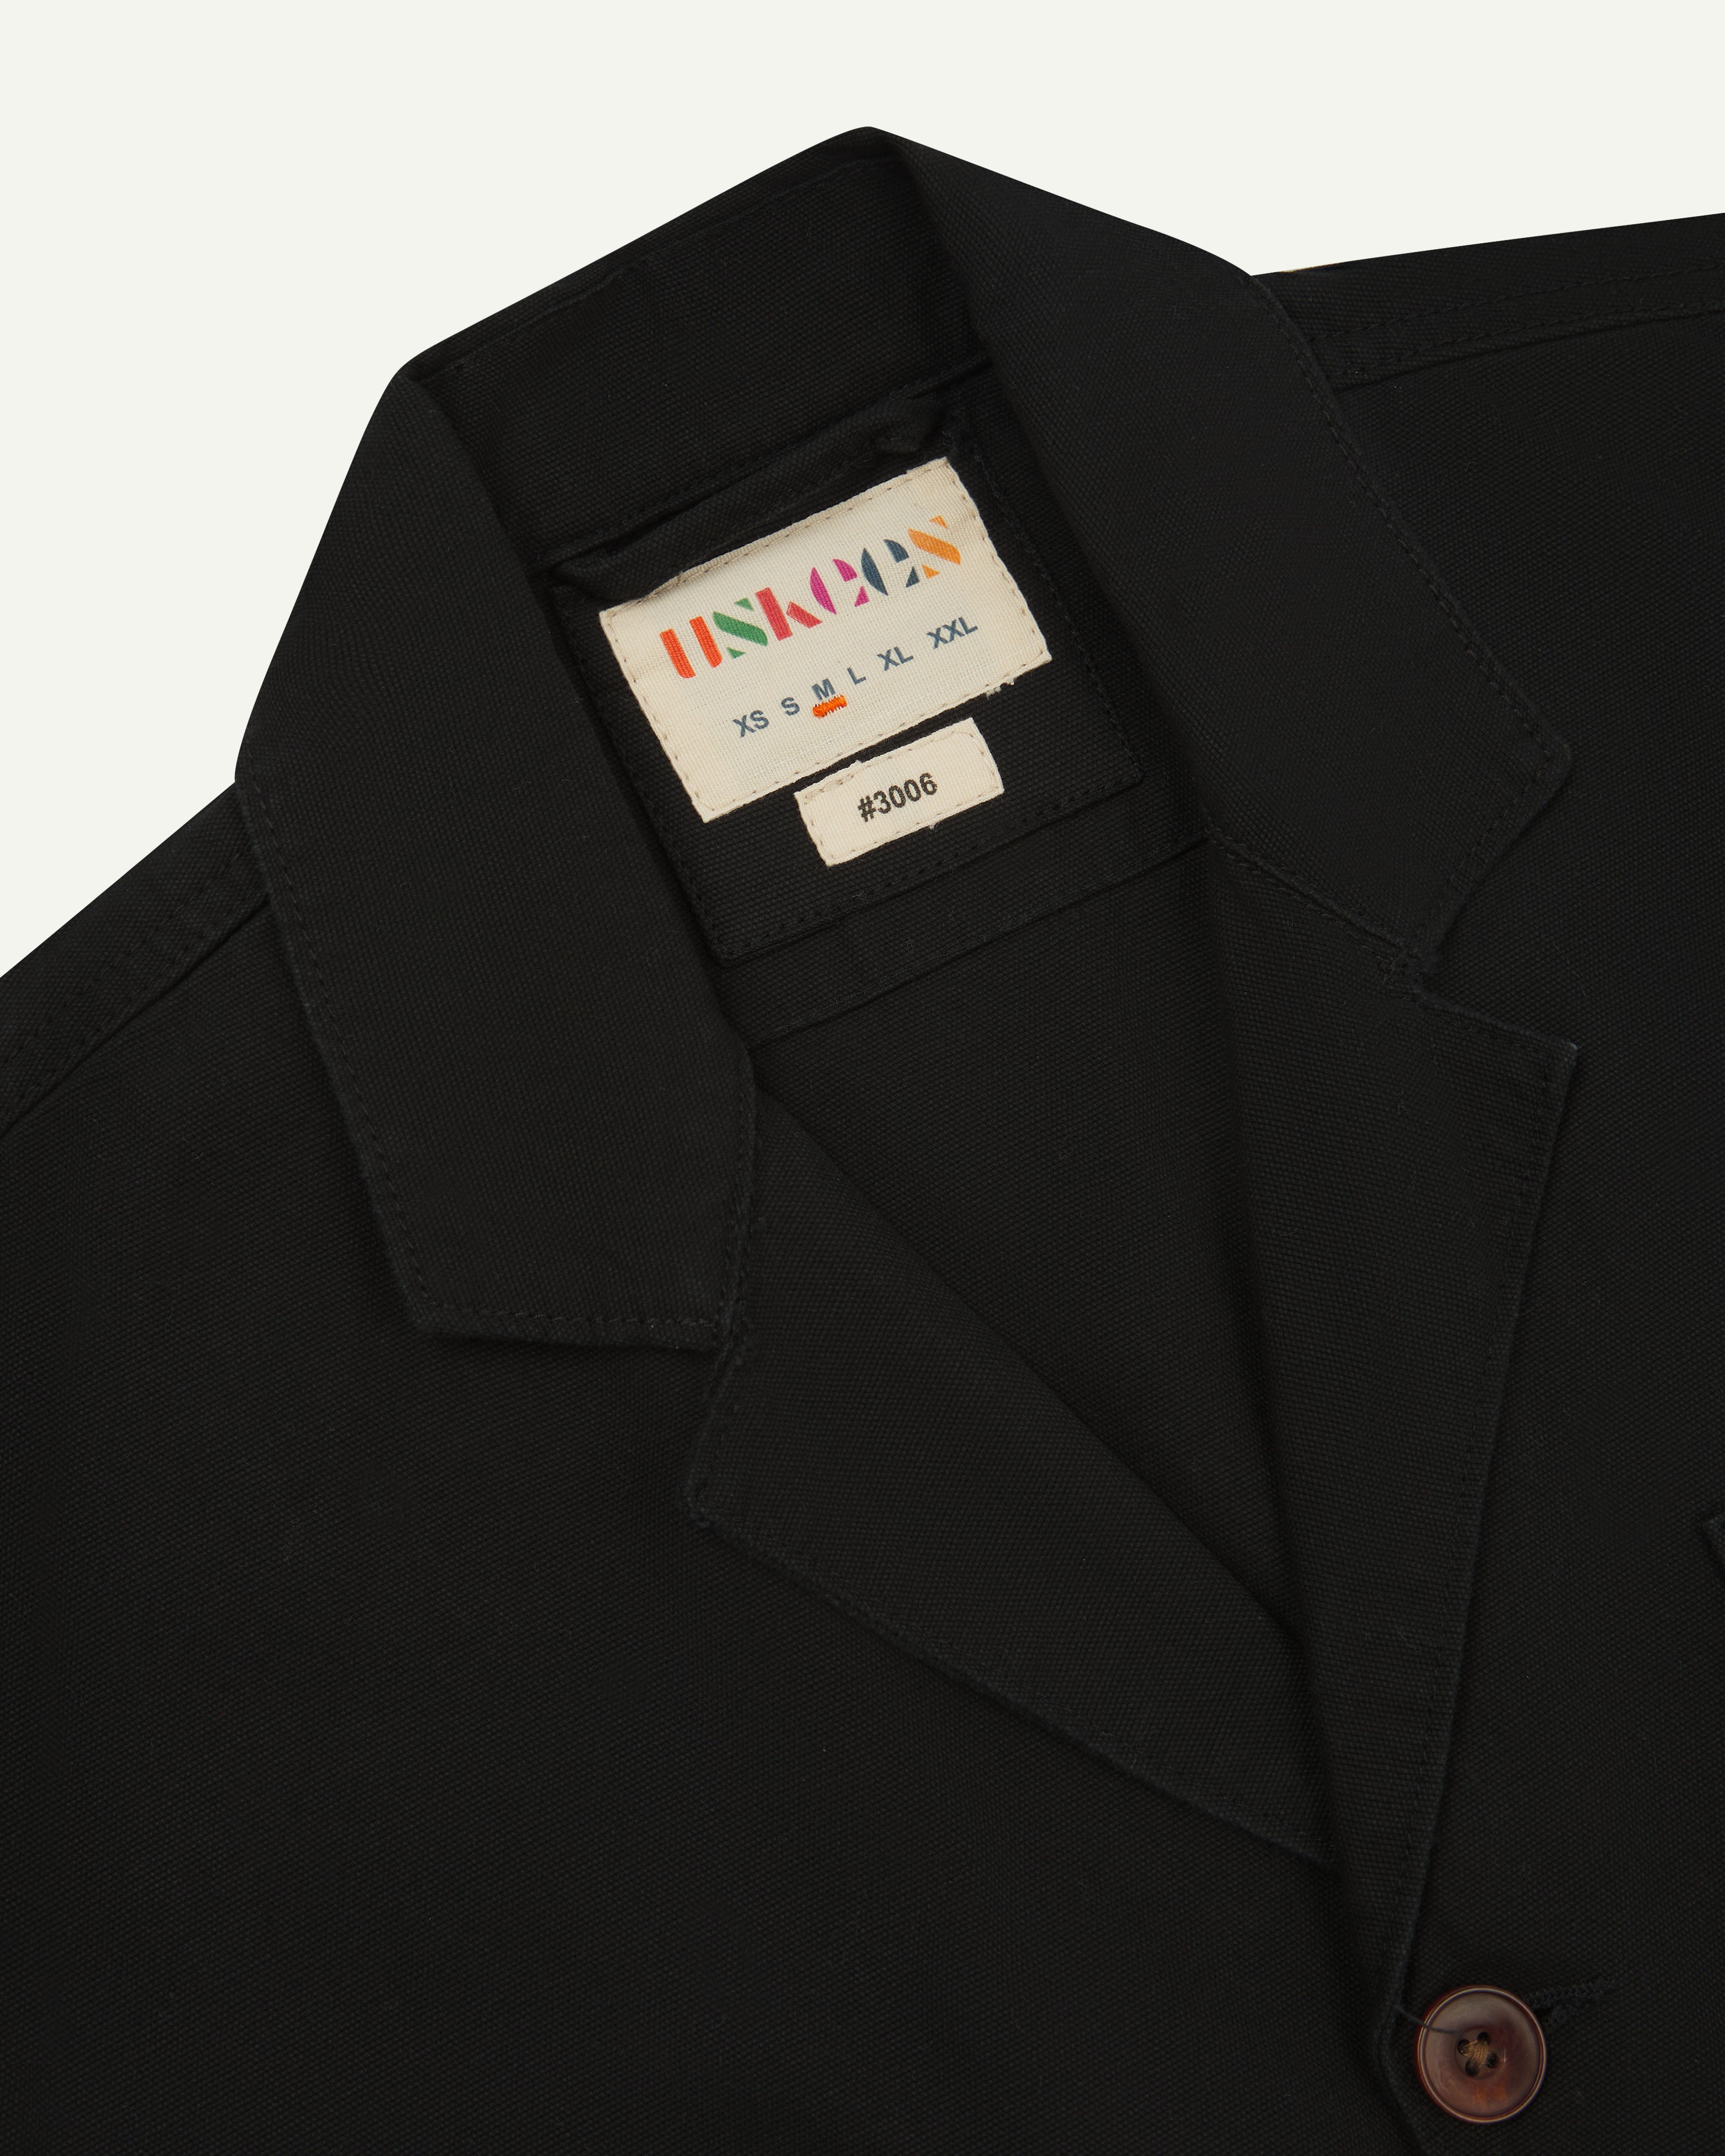 Front close view of black blazer showing brand label and collar from Uskees.